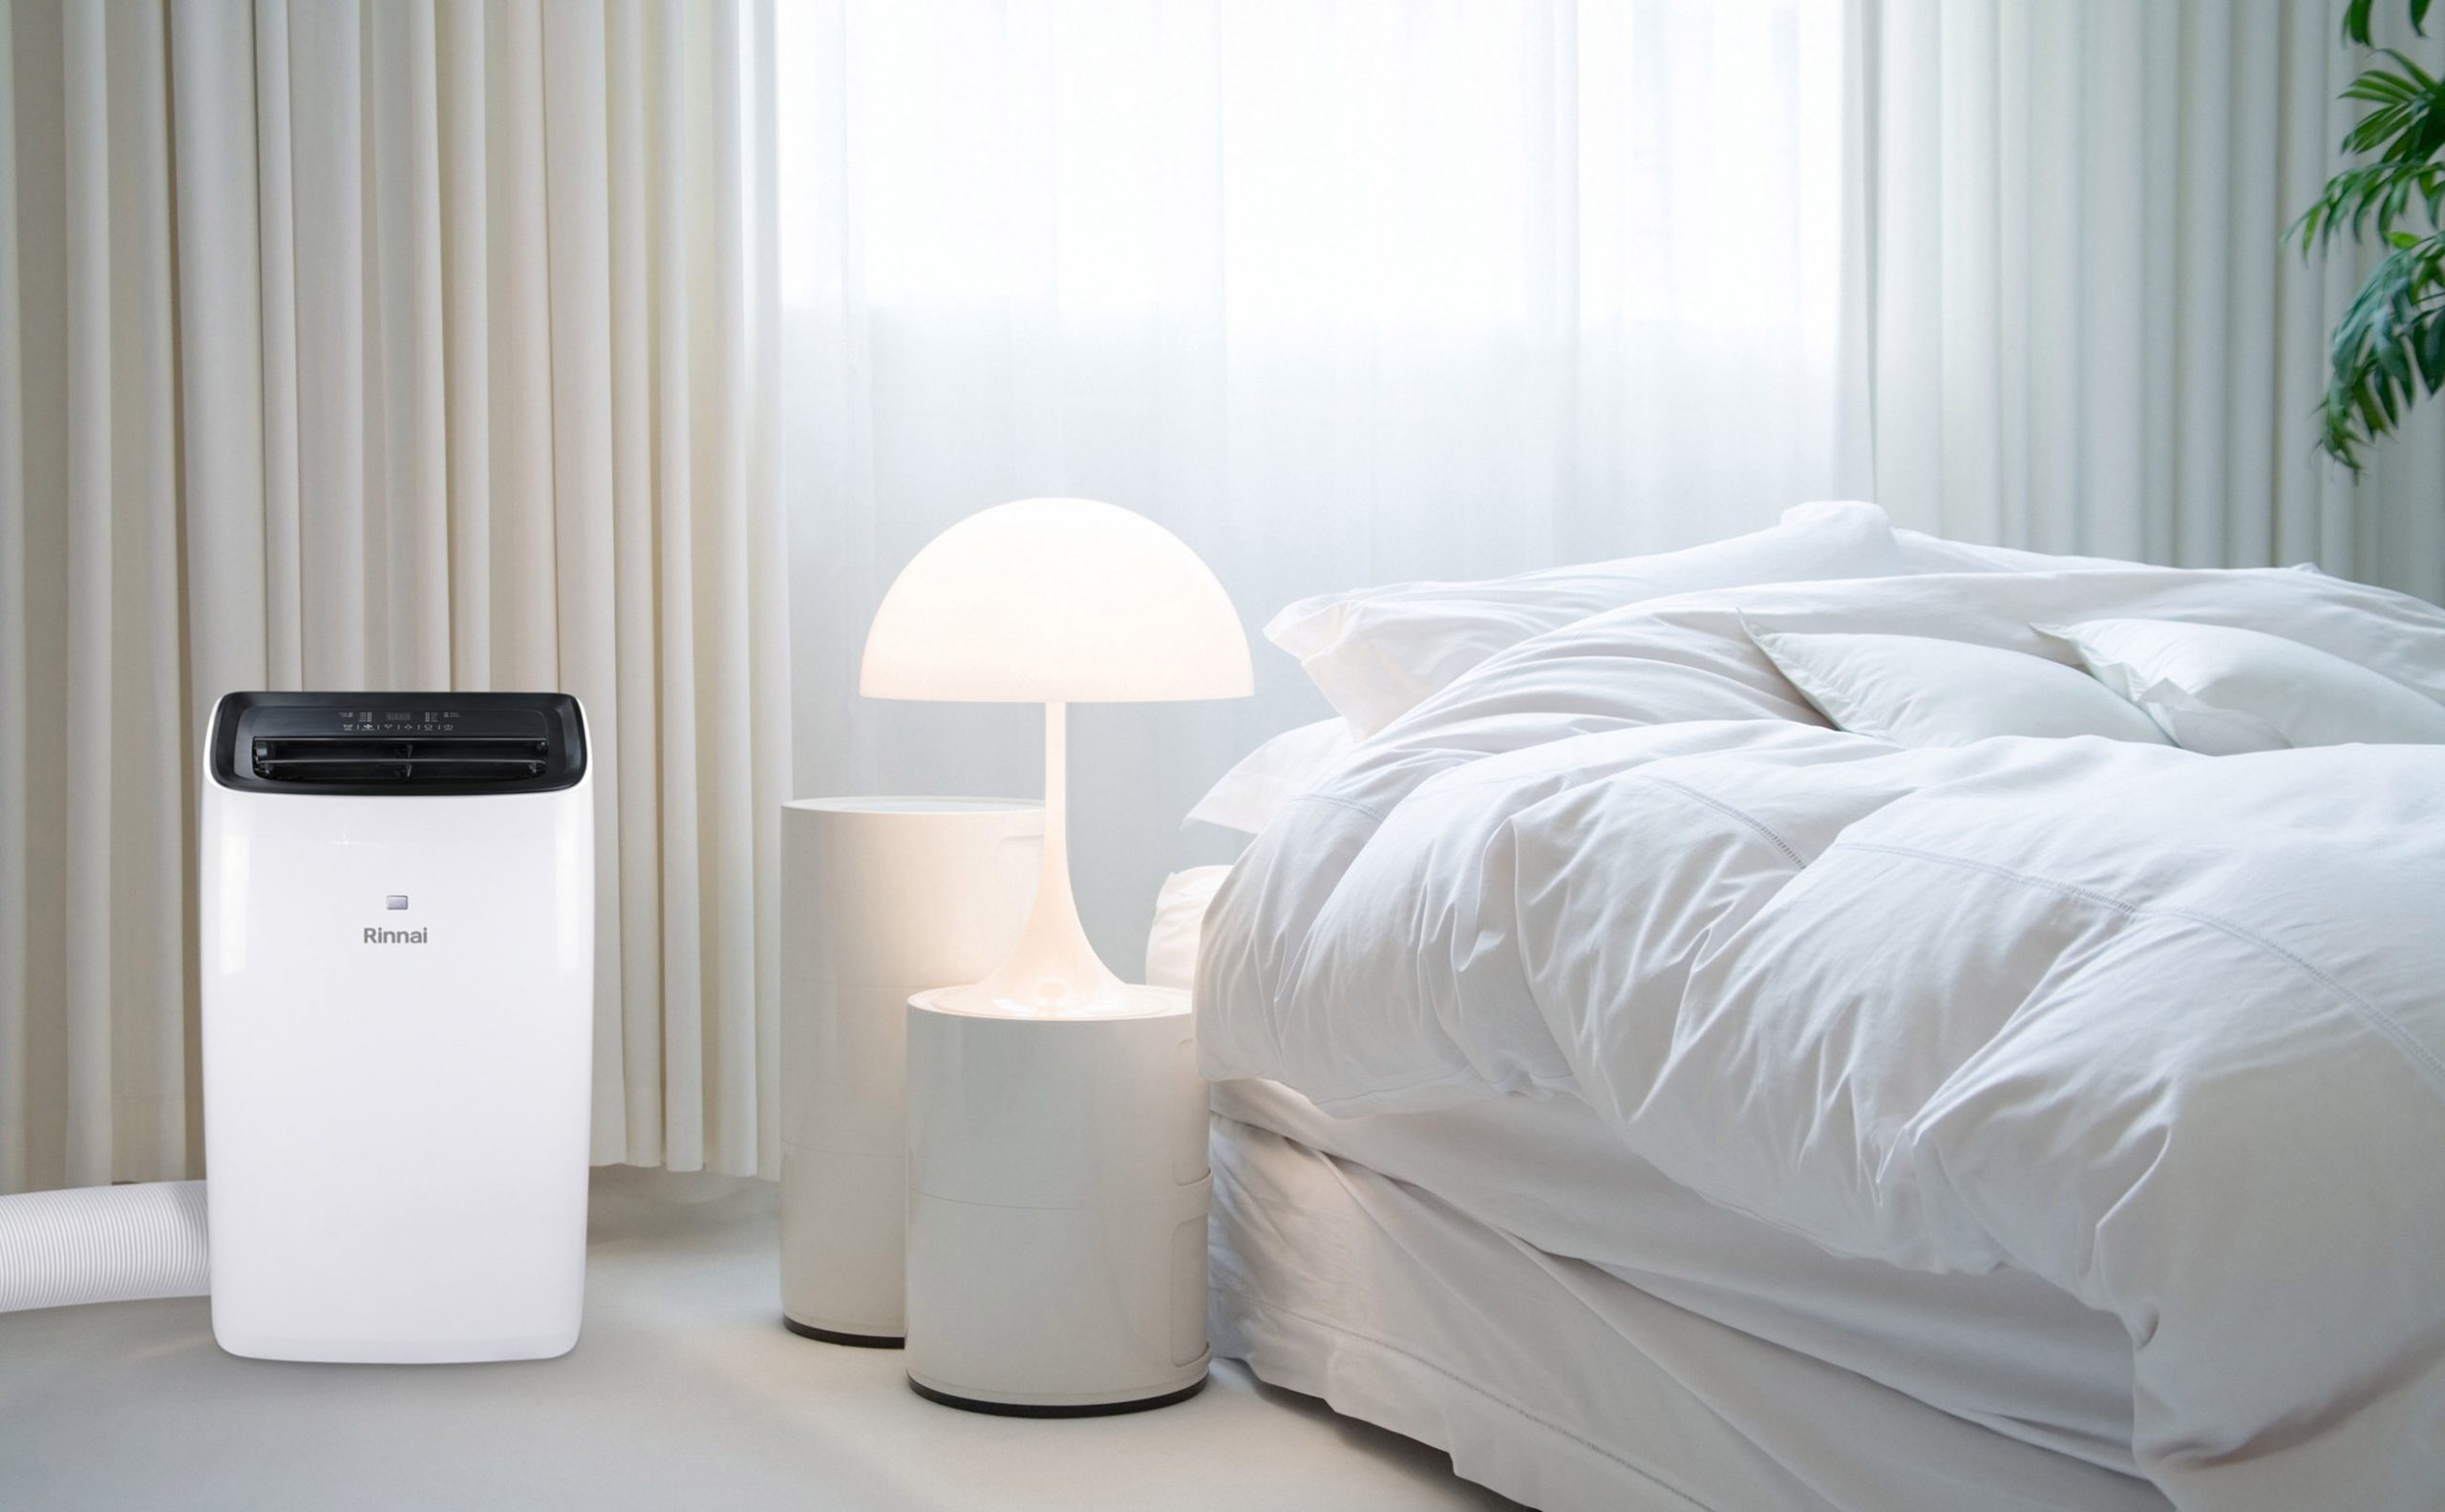 Rinnai-Portable-Air-Conditioners-RPC41NC-Bedroom-Insitu-scaled